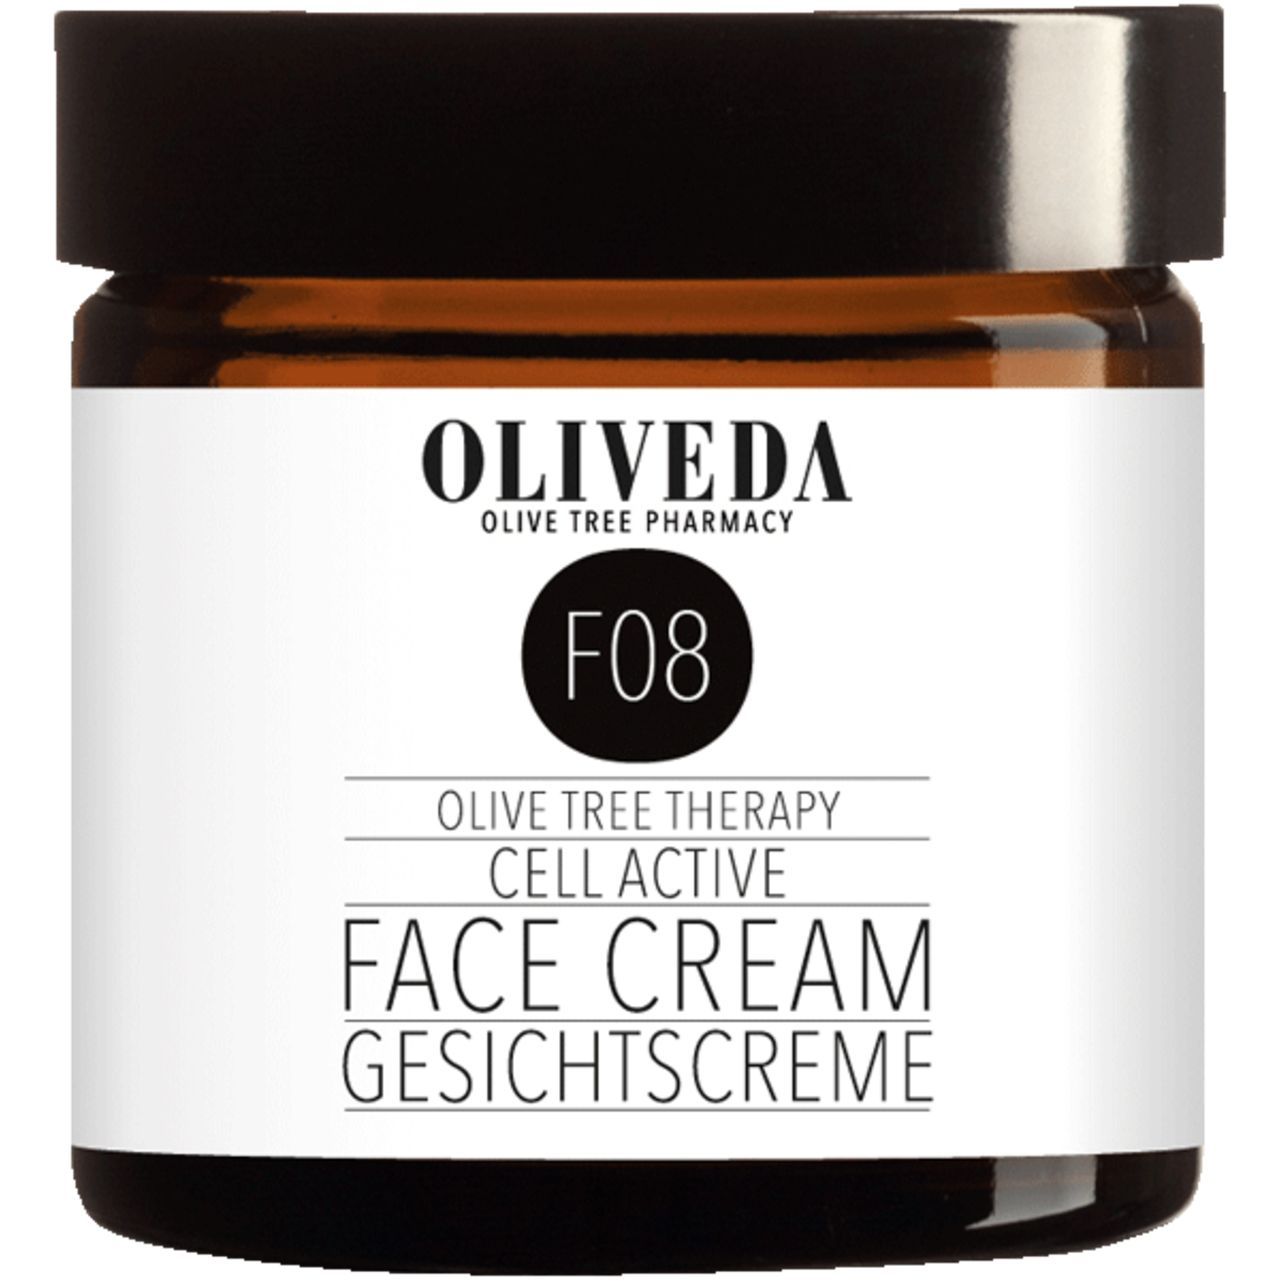 Oliveda, Gesichtscreme Cell Active